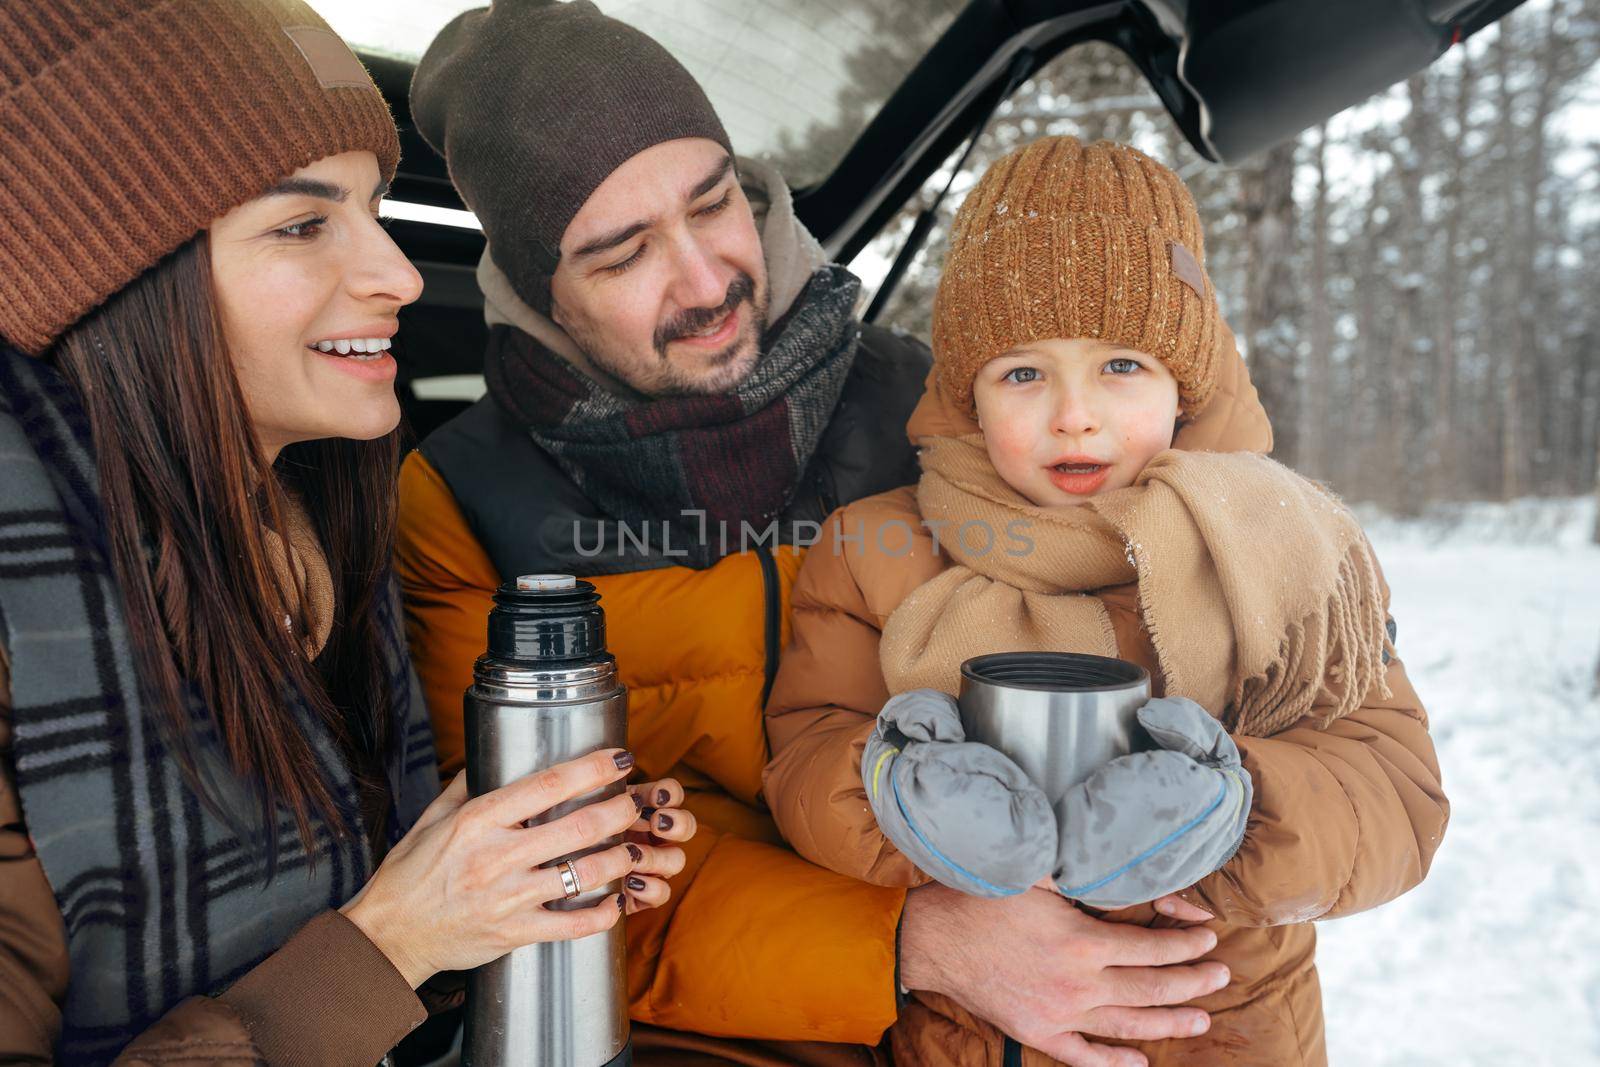 Winter portrait of a family sit on car trunk enjoy their vacation in forest by Fabrikasimf